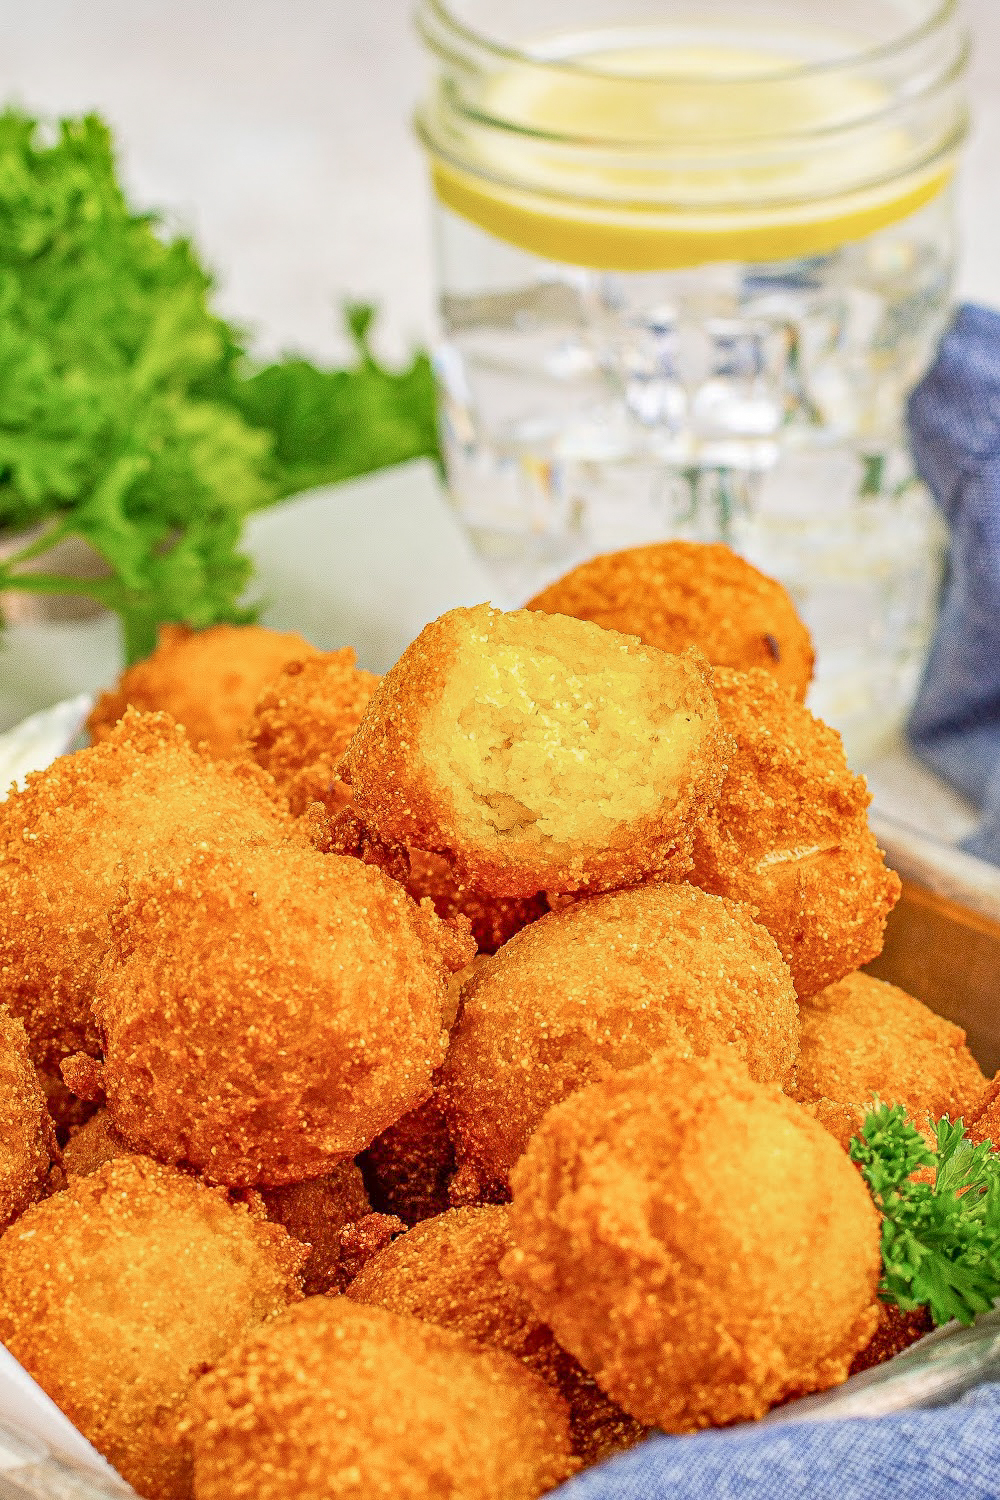 Hush puppies on a galvanized tray sitting a table next to a glass of water with lemon and a blue napkin.